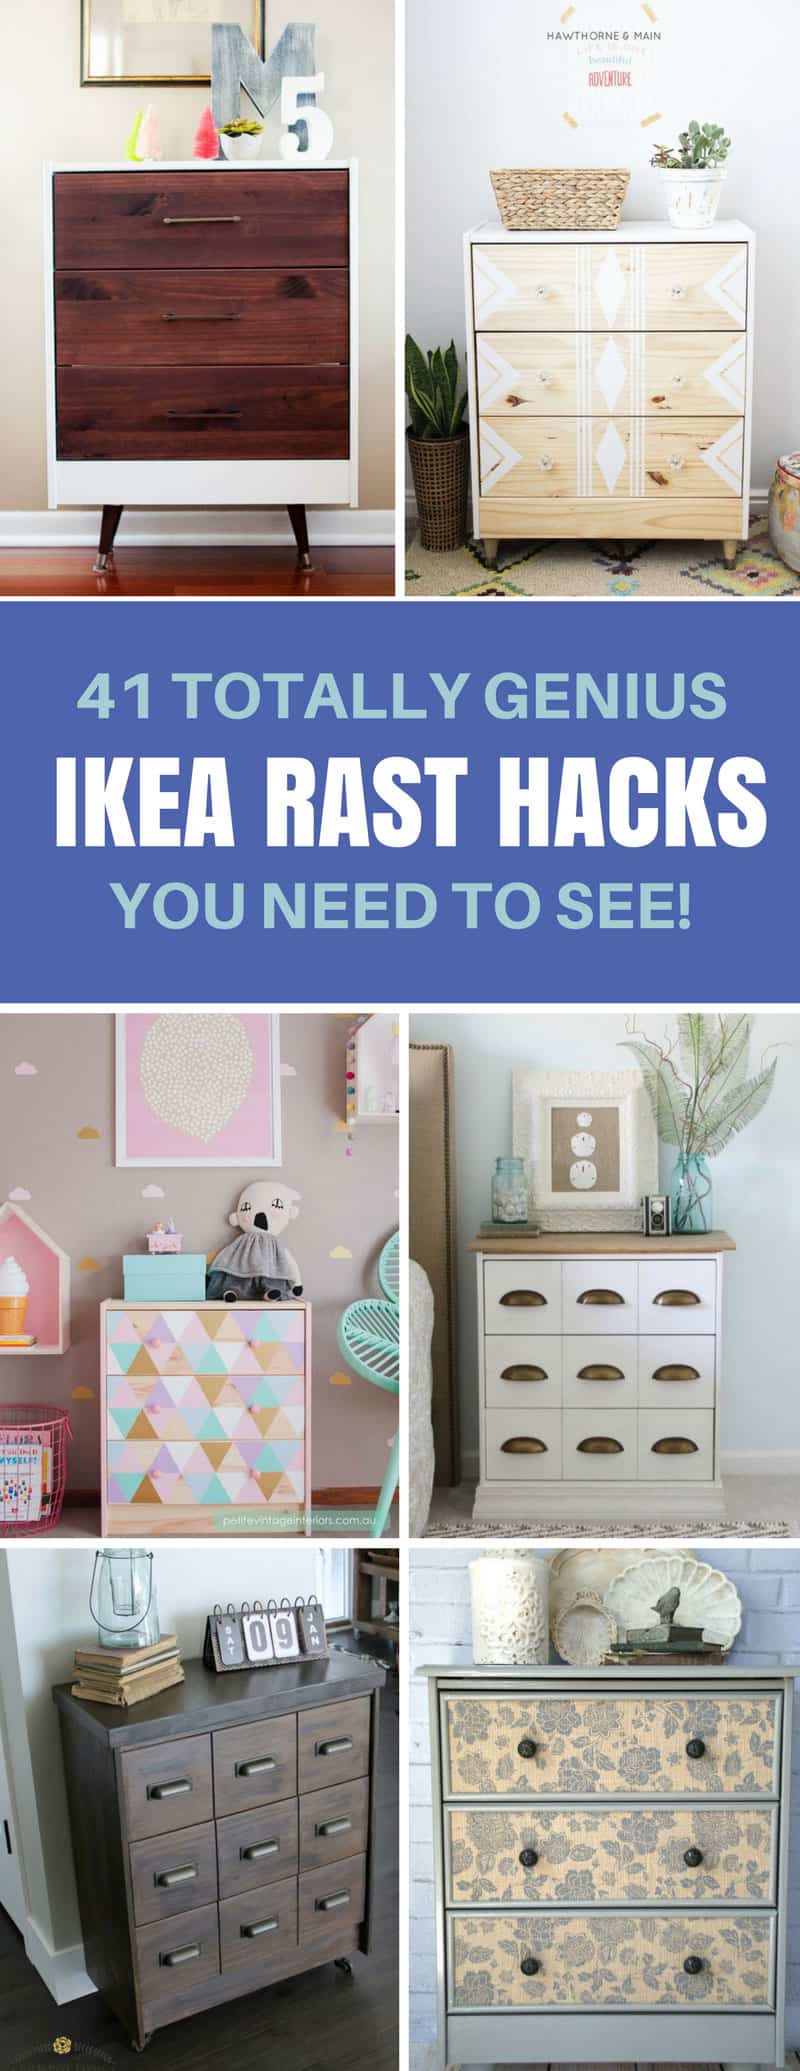 Ikea Rast Hack Ideas - I had no idea there were so many ways to take a cheap but boring piece of furniture and turn it into something stylish and practical!